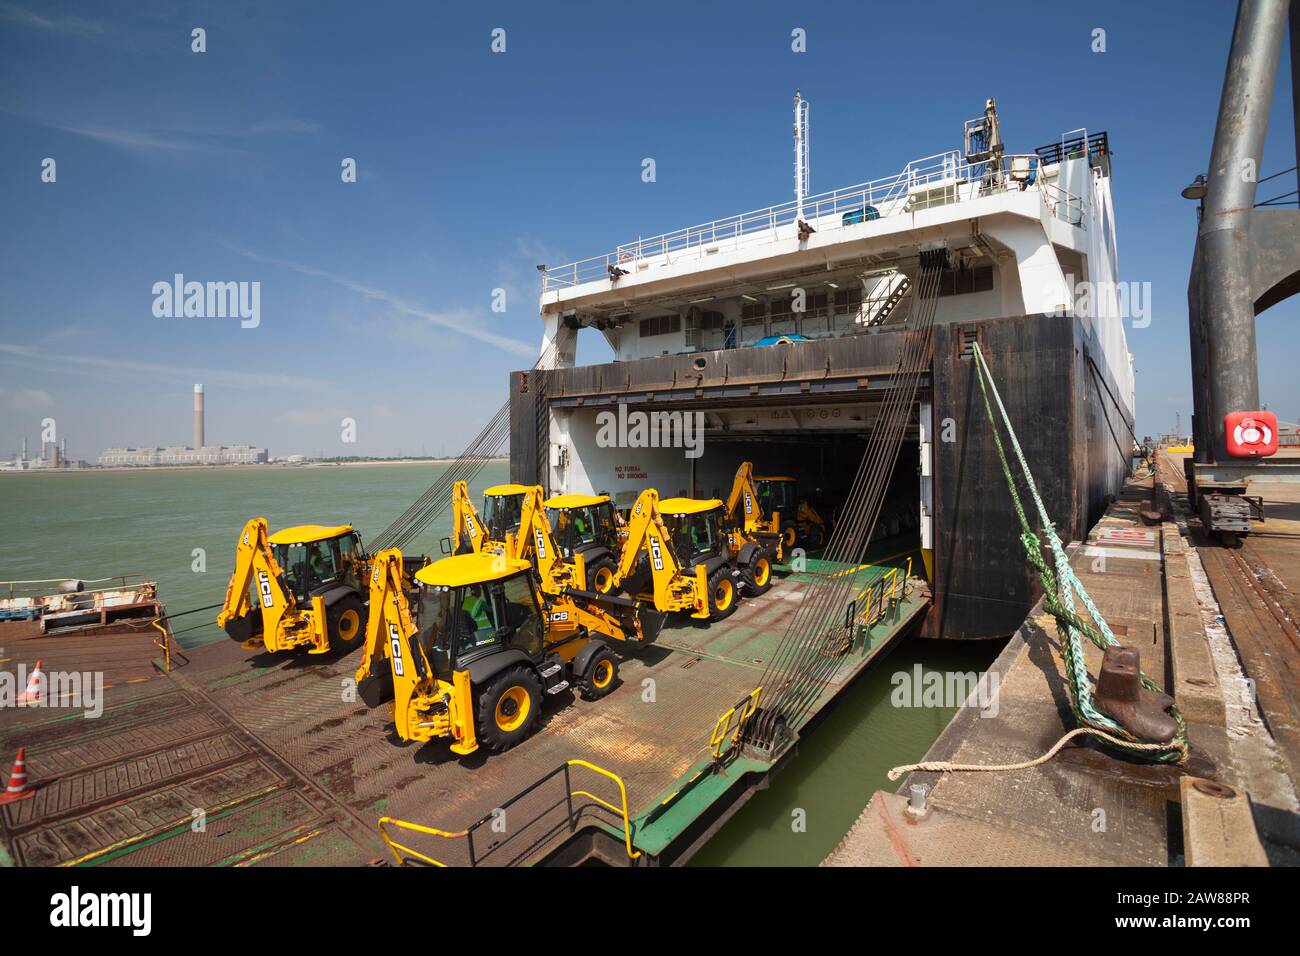 Loading JCB diggers for Export trade Brexit Stock Photo